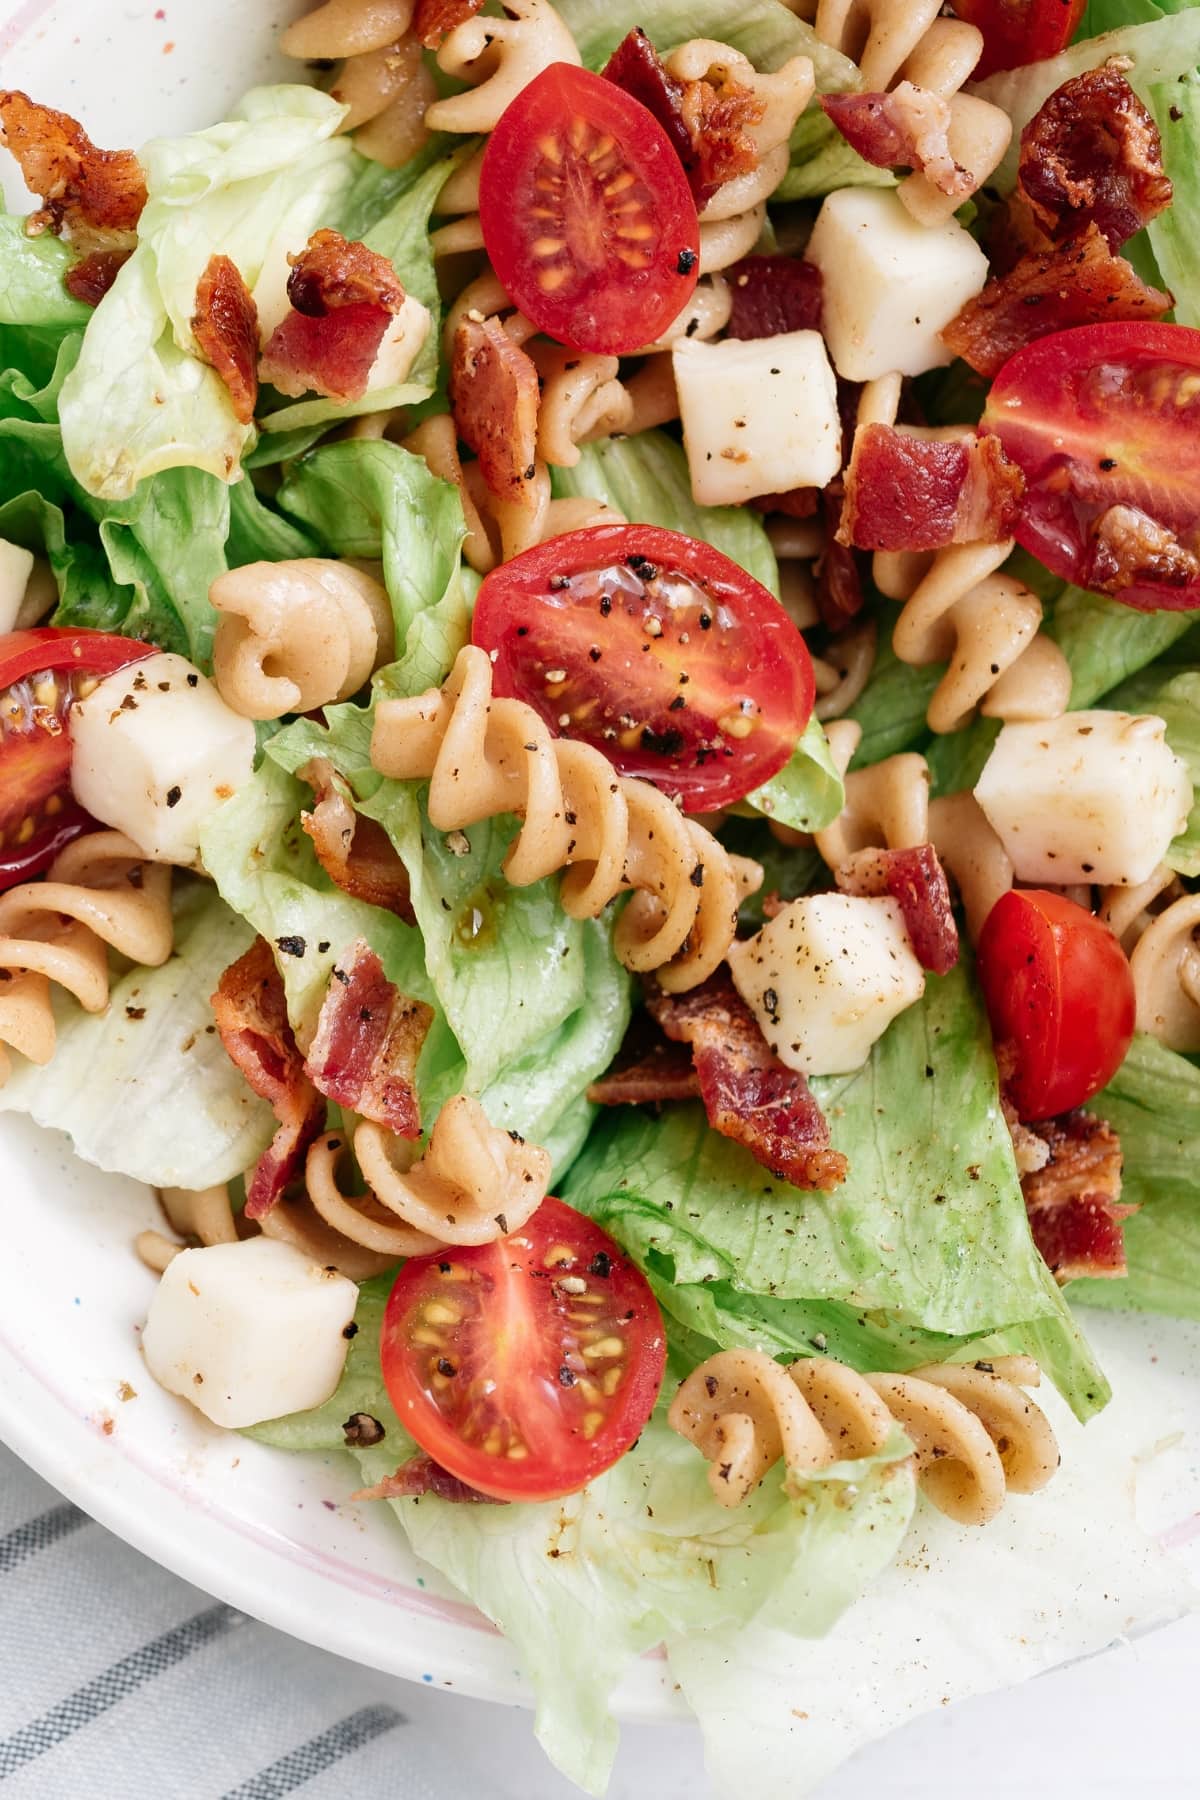 Homemade Healthy BLT Pasta Salad with Bacon, Lettuce and Tomatoes